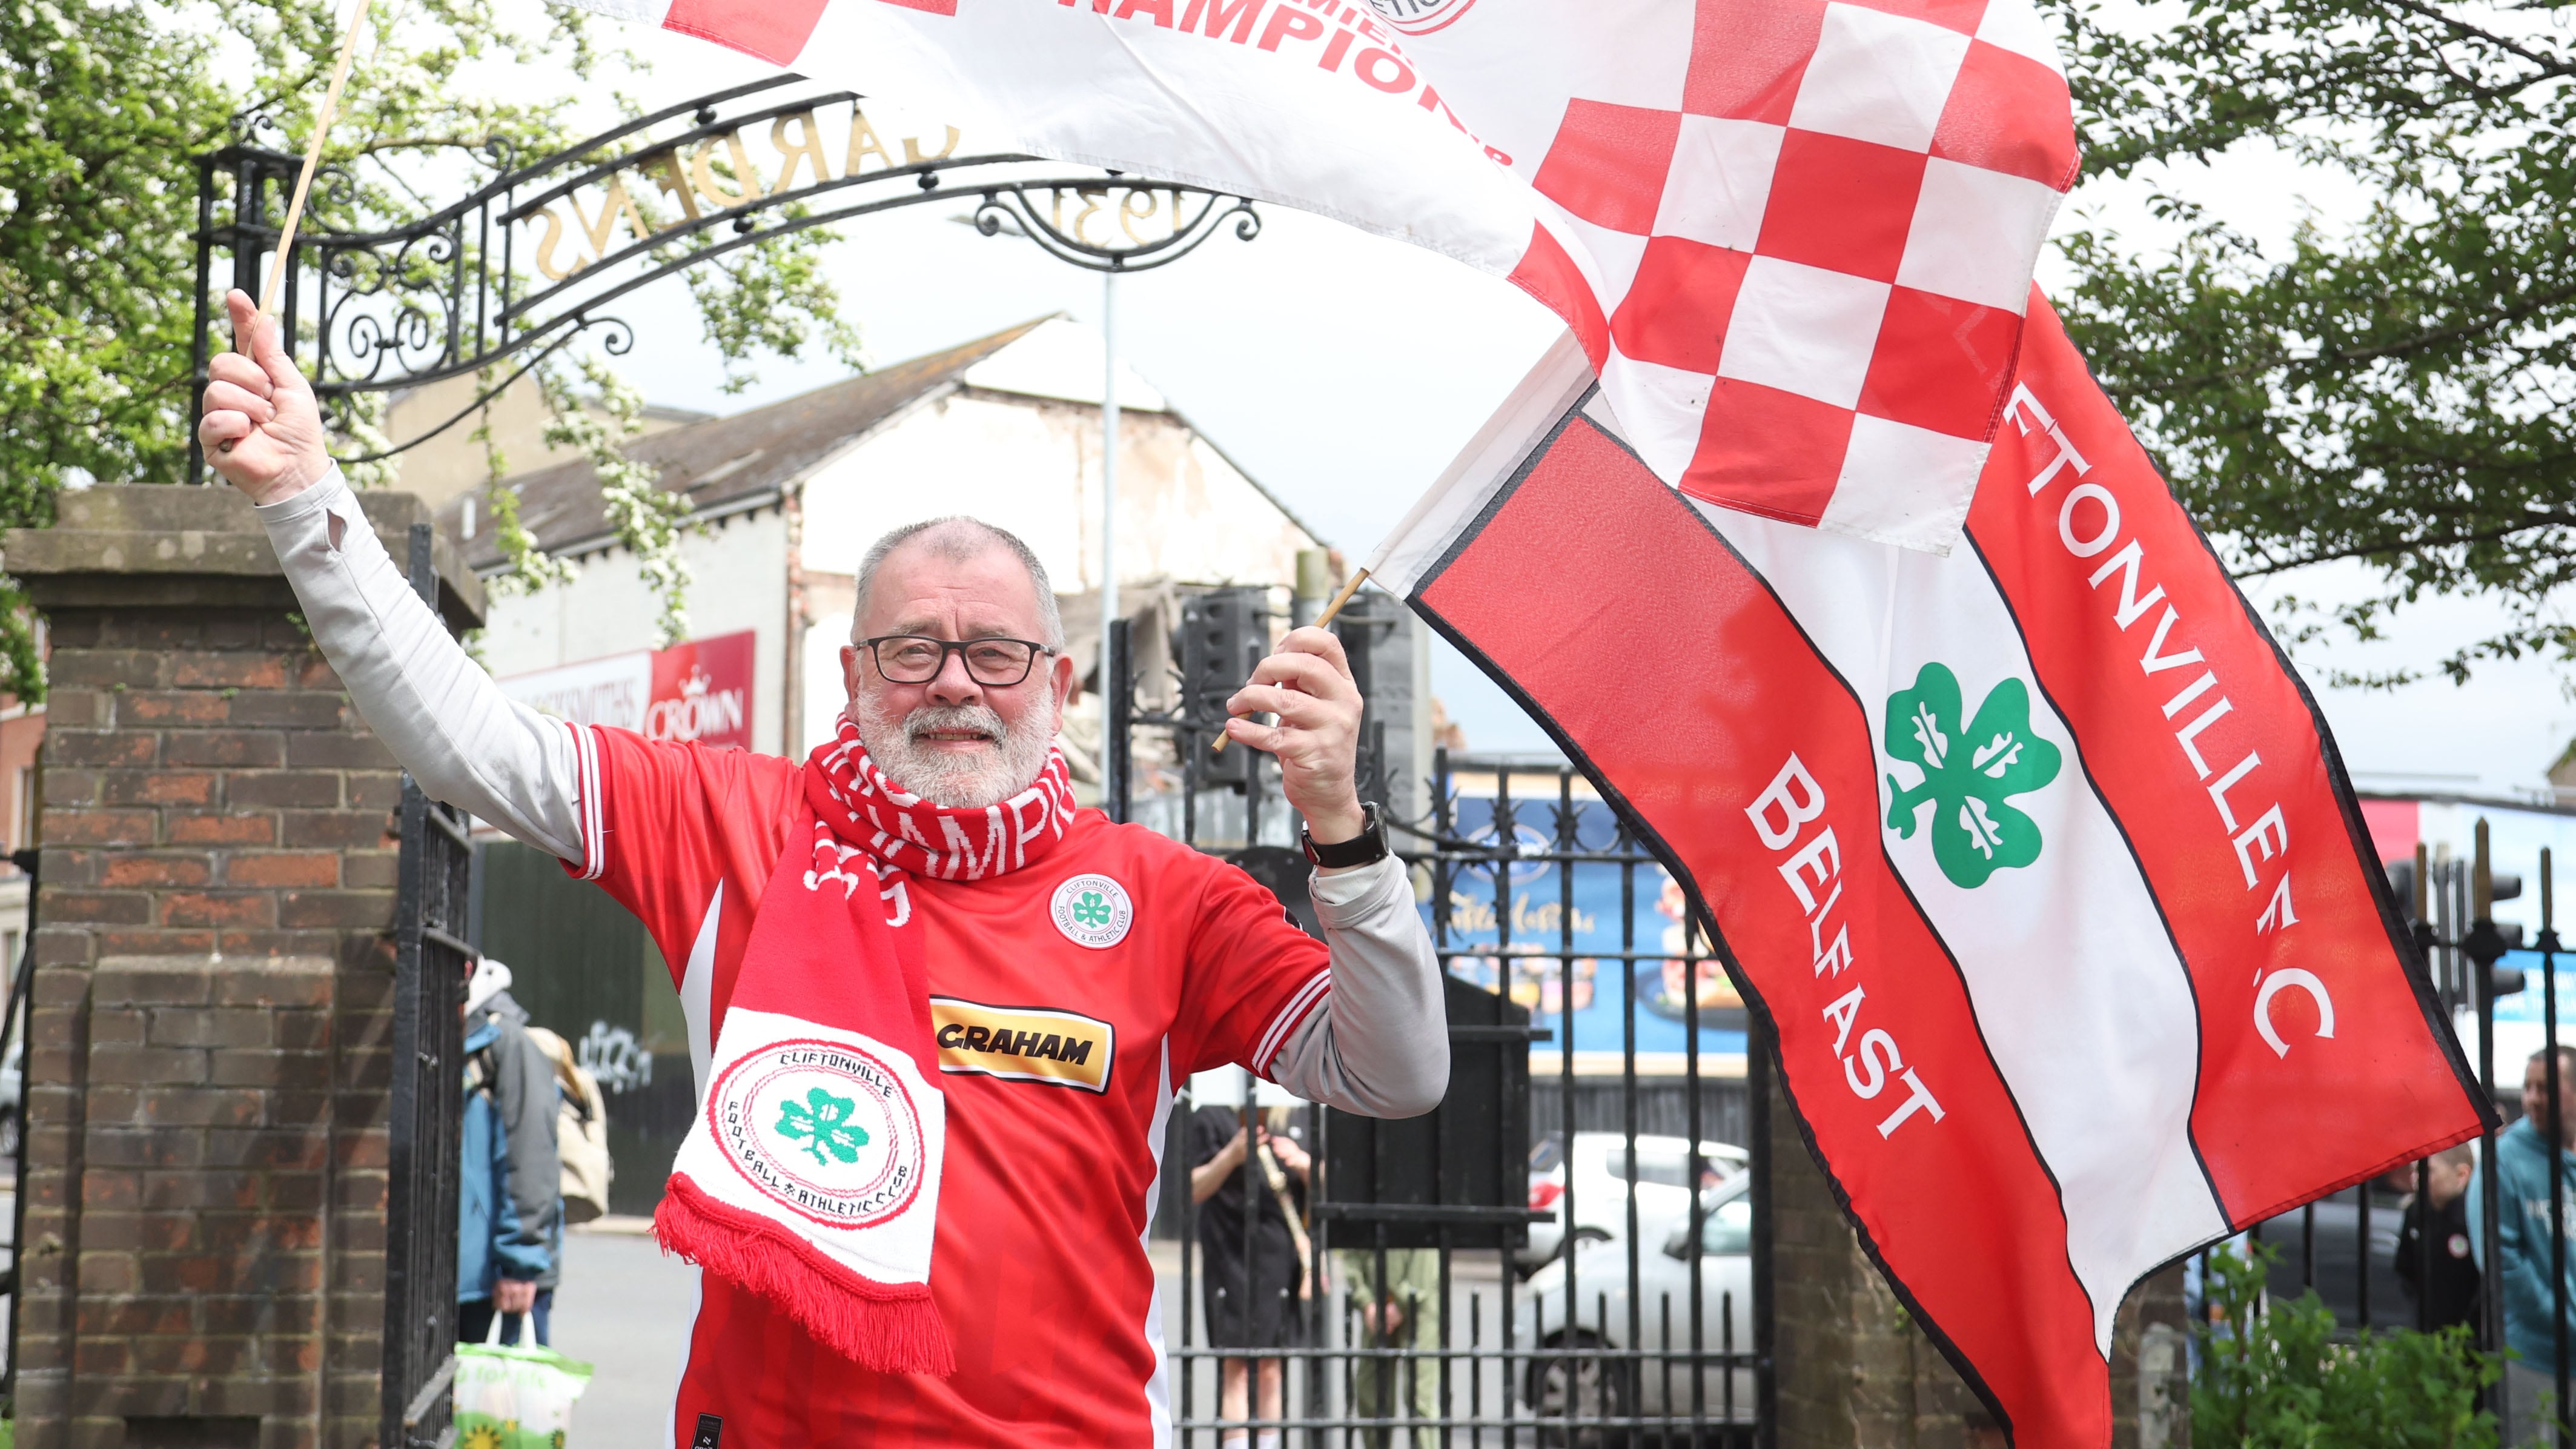 Cliftonville celebrate with the fans during an open top bus tour across Belfast after winning the Irish Cup oat Windsor on Saturday.
PIC COLM LENAGHAN